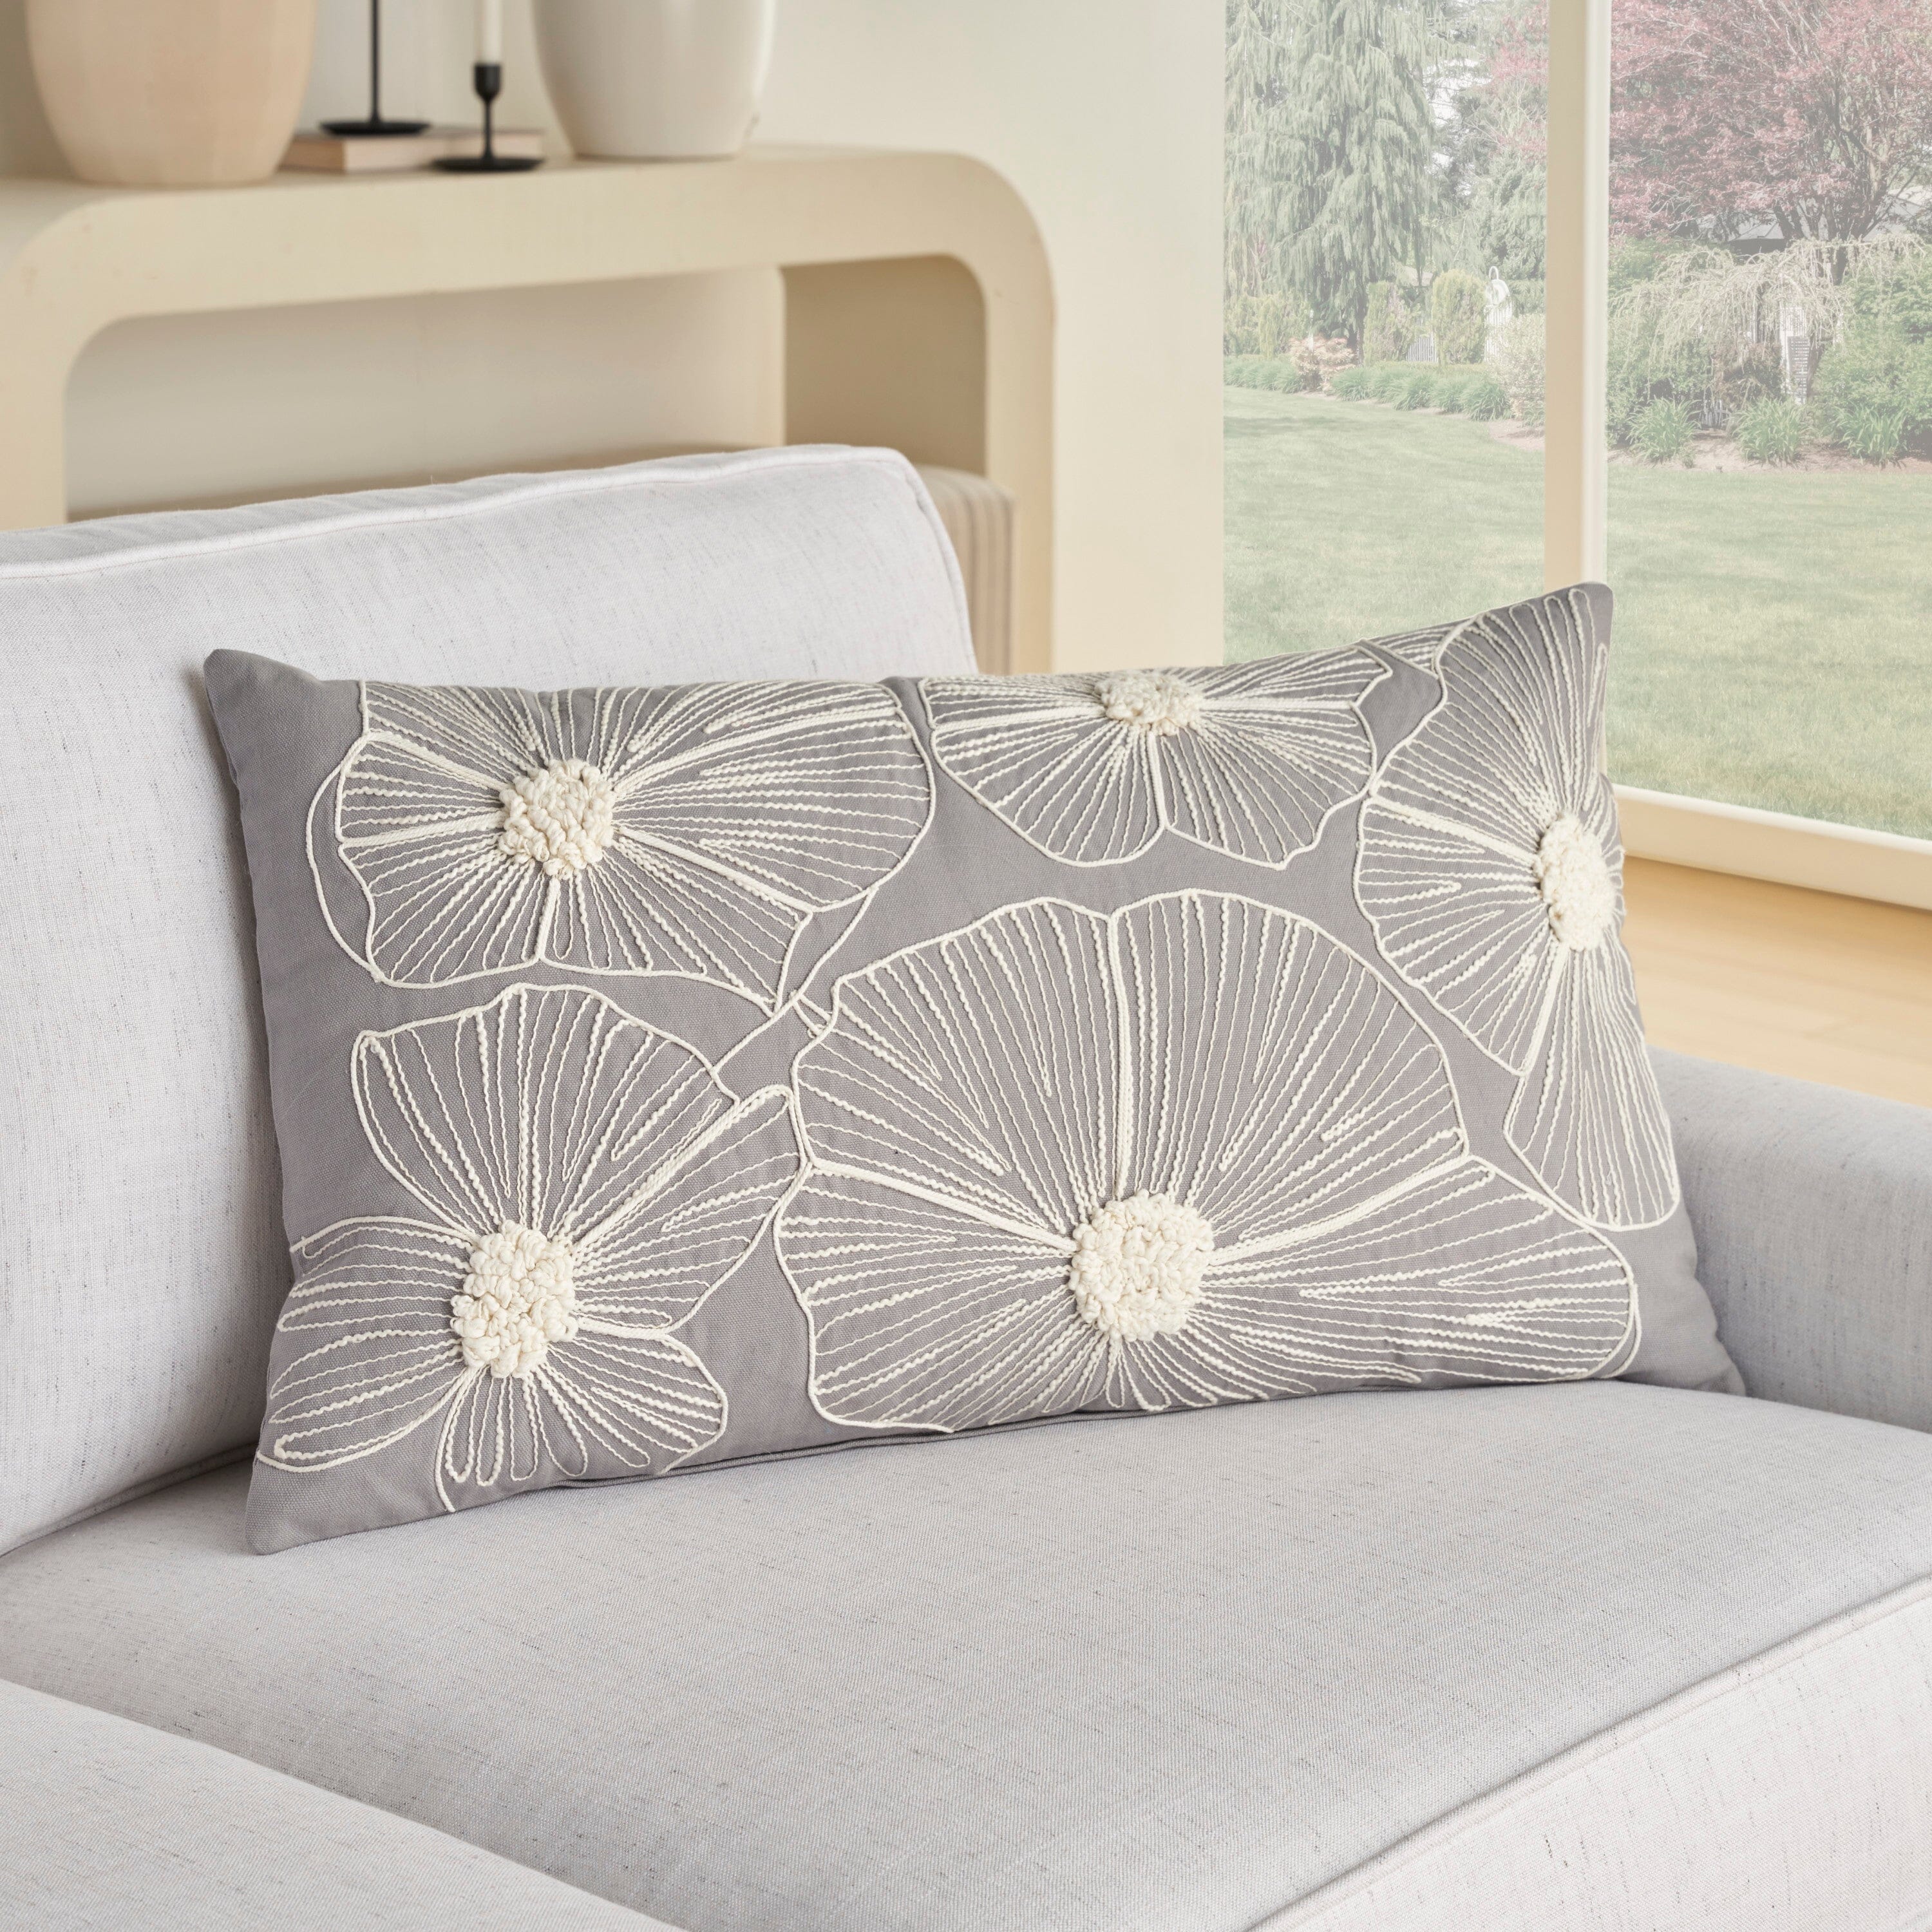 Mina Victory Cover Embroidered Flowers 14" x 24" Grey Indoor Pillow Covers Mina Victory